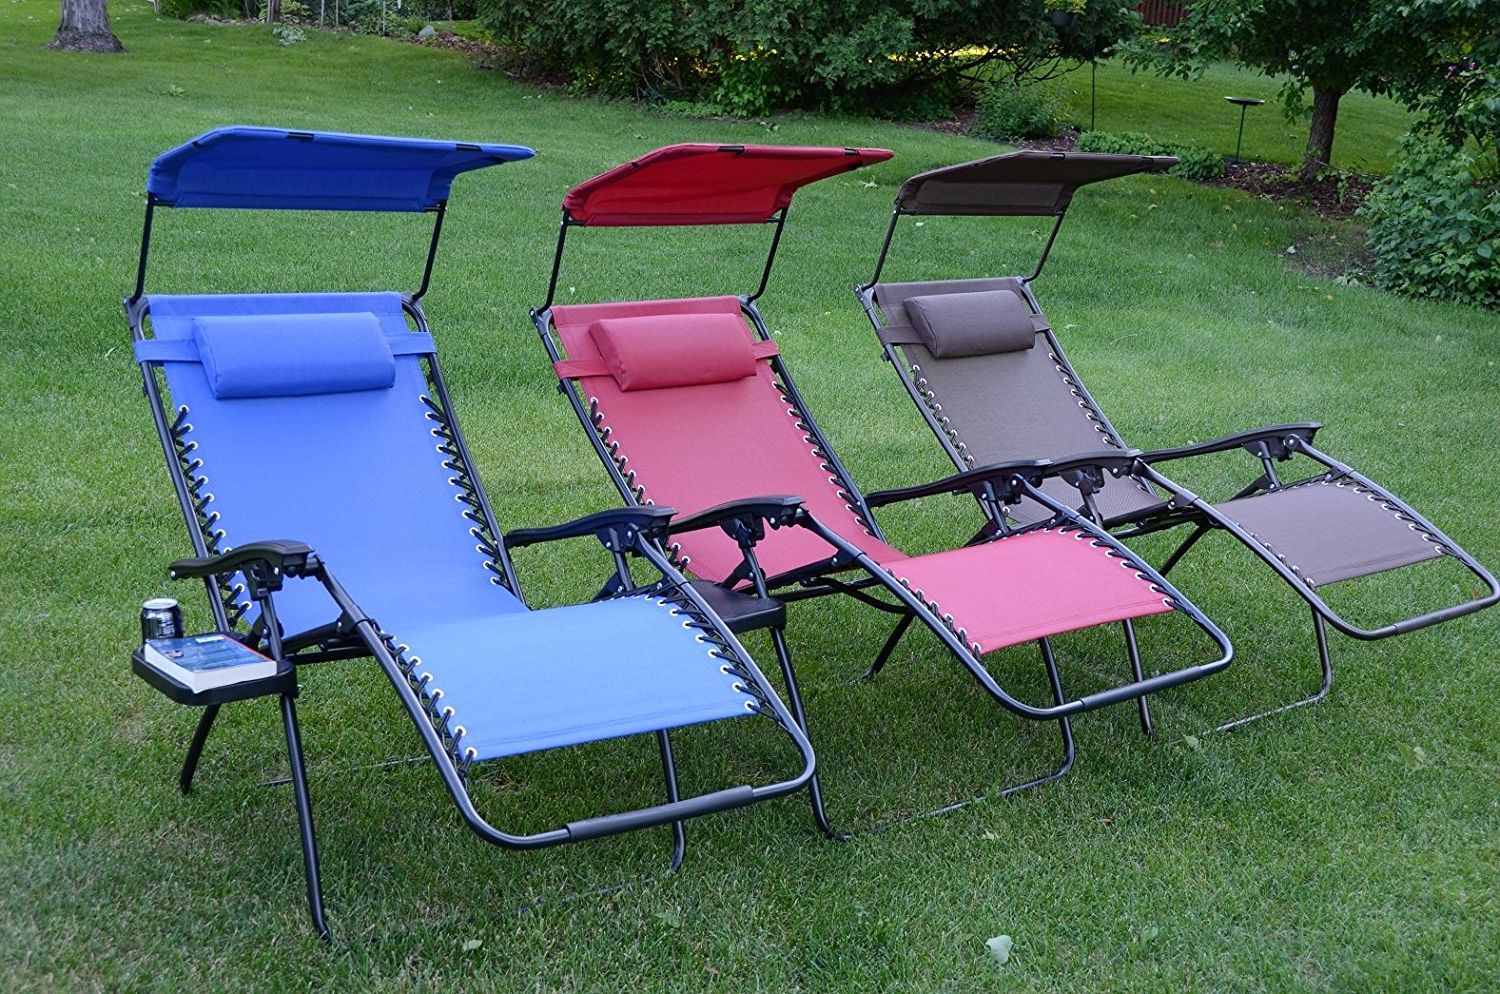 Our Review Of The 10 Best Outdoor Zero Gravity Recliners In Well Known Deluxe Padded Chairs With Canopy And Tray (View 8 of 25)